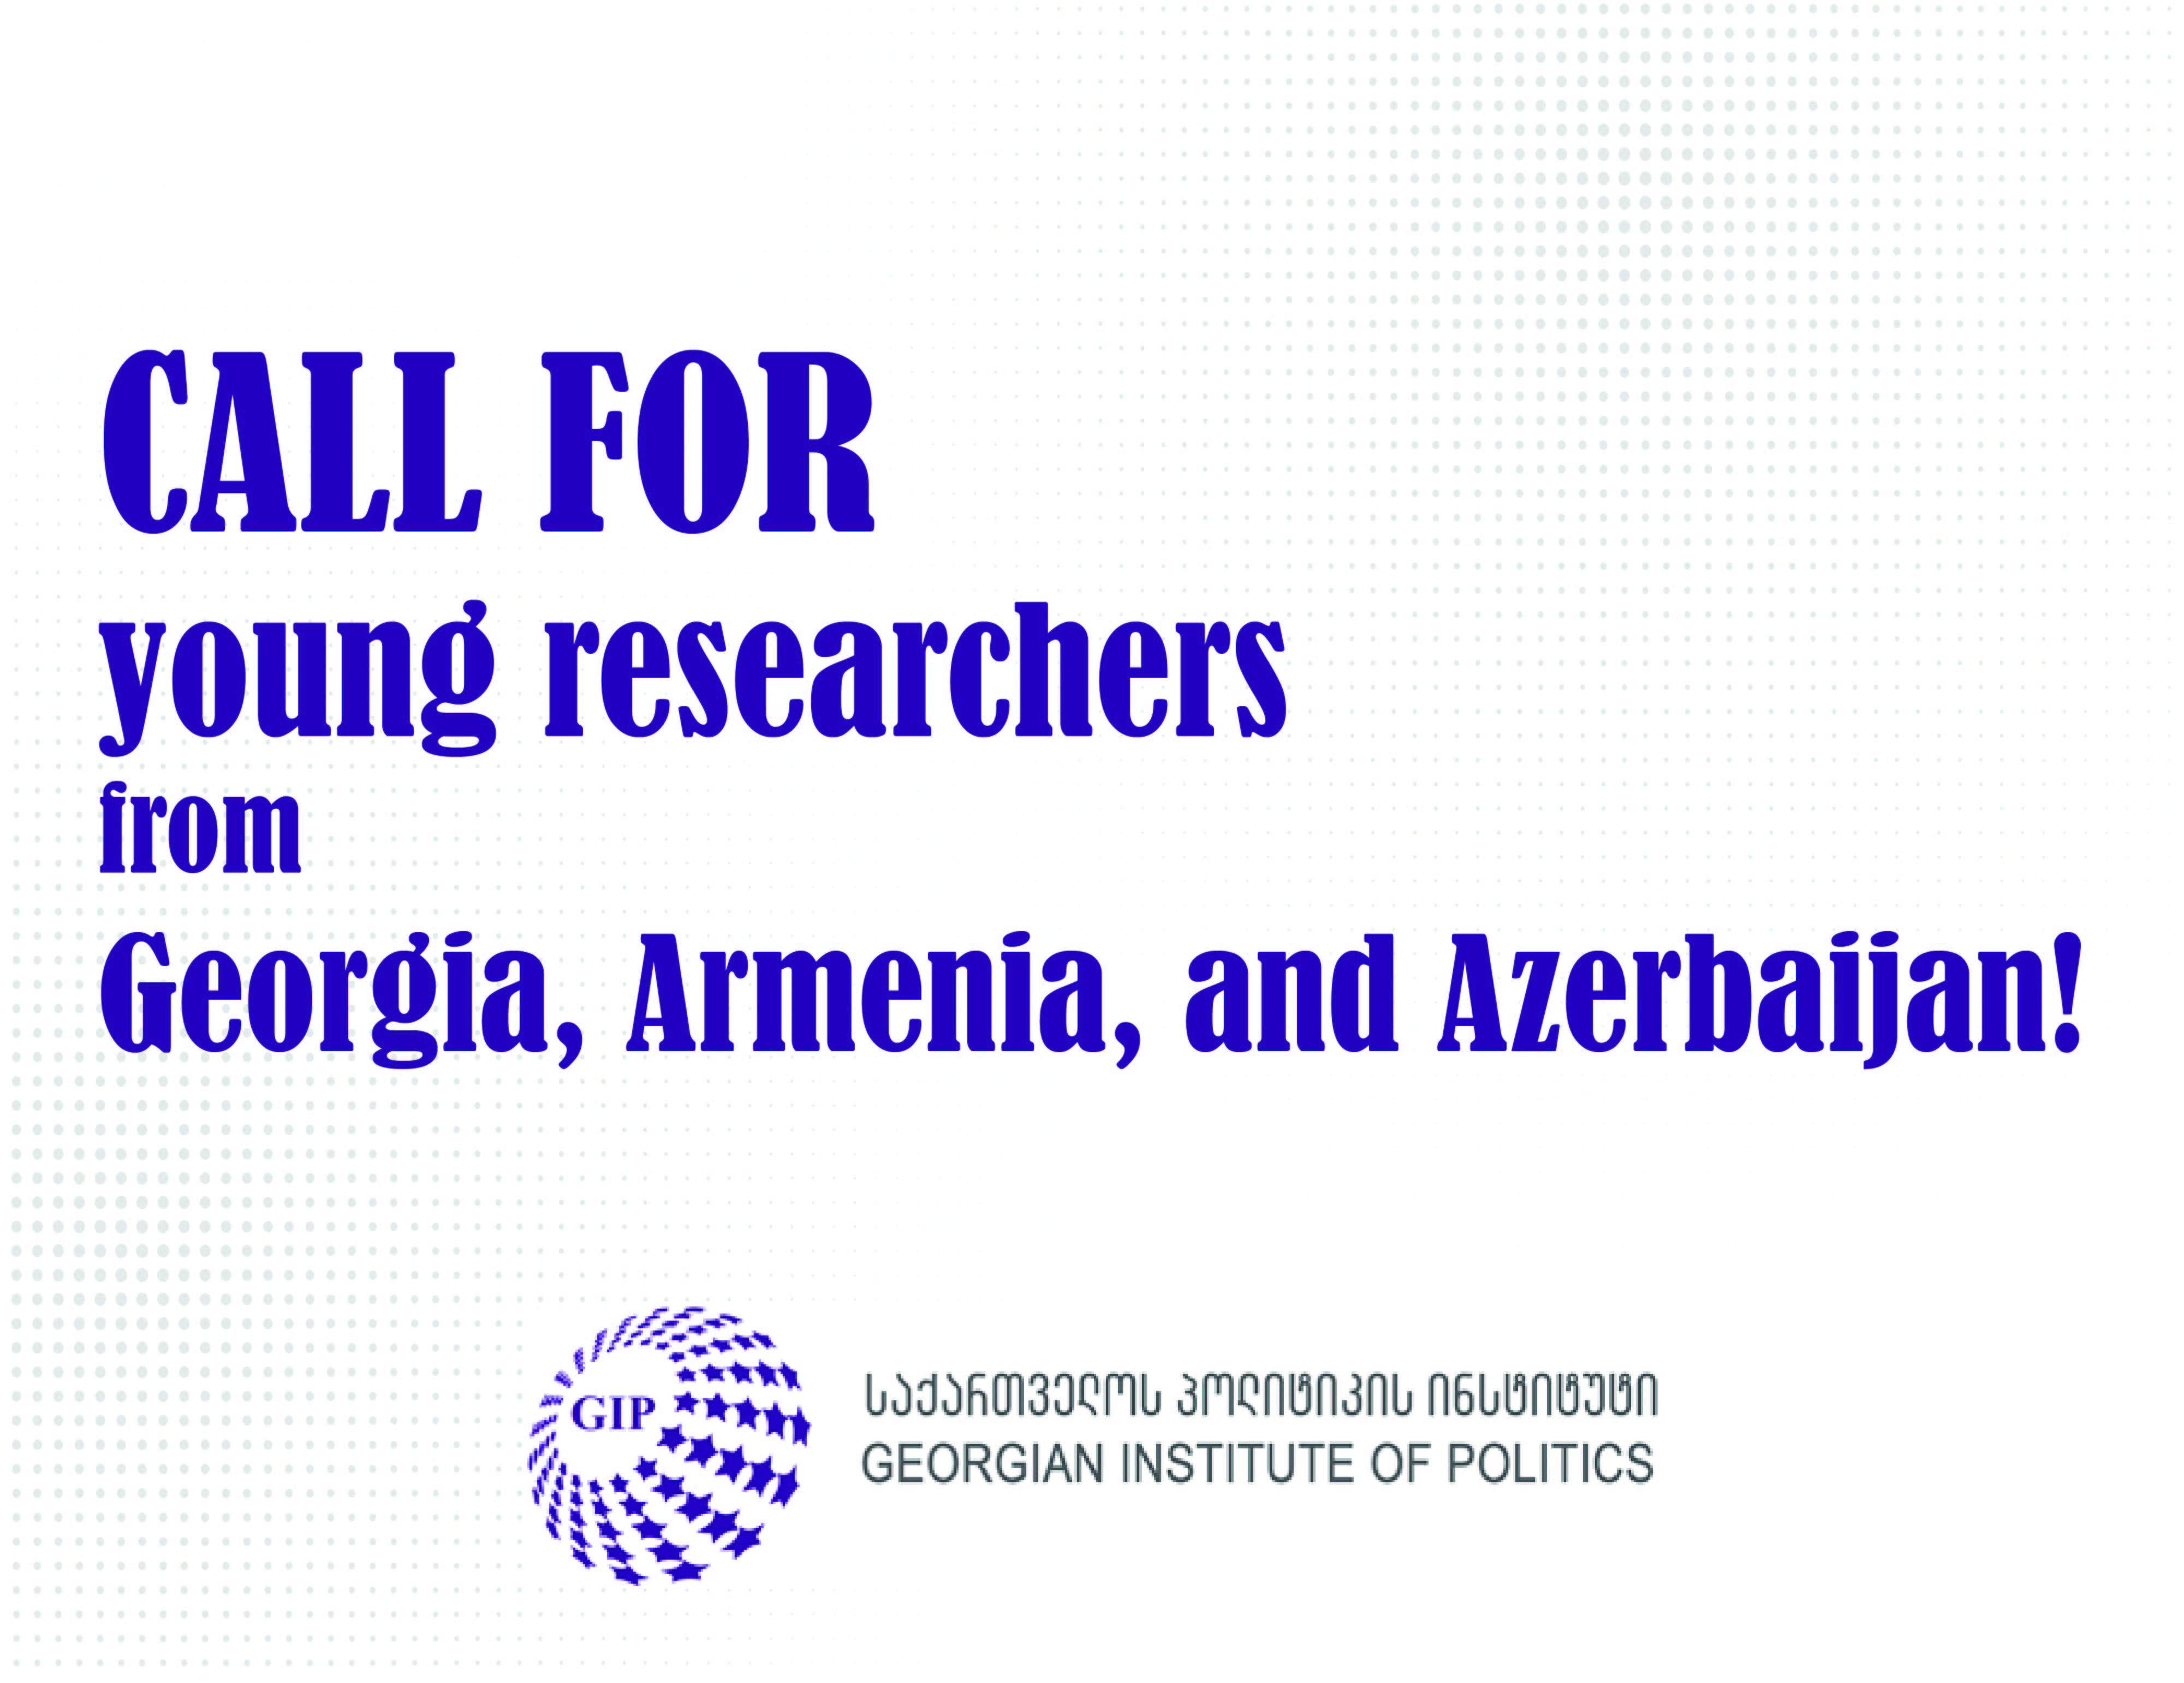 Call for young researchers from Georgia, Armenia, and Azerbaijan on the geopolitical shifts in the South Caucasus region